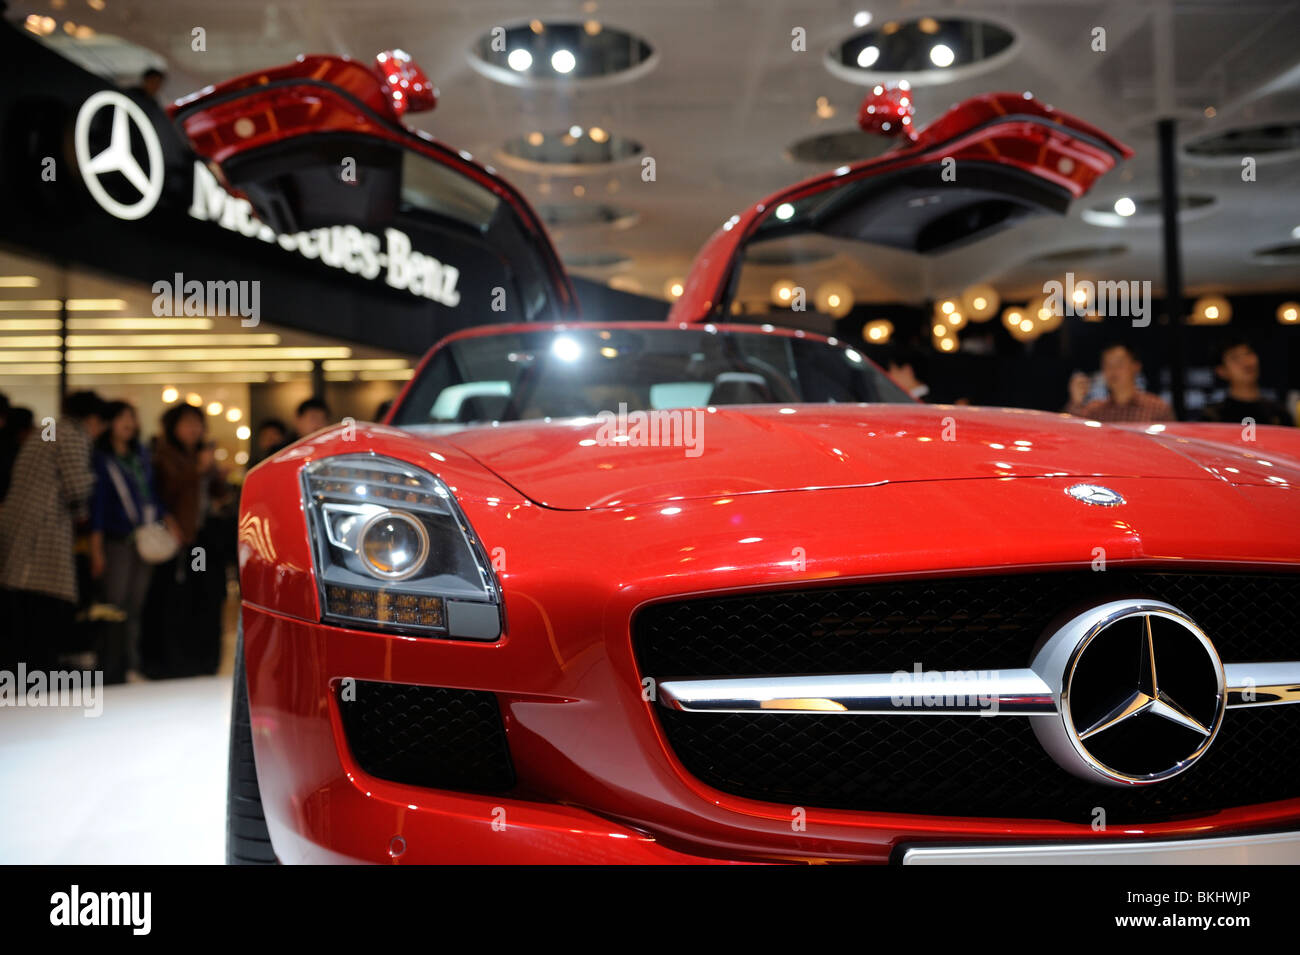 Mercedes-Benz SLS AMG car is displayed at the Beijing Auto Show. 24-Apr-2010 Stock Photo